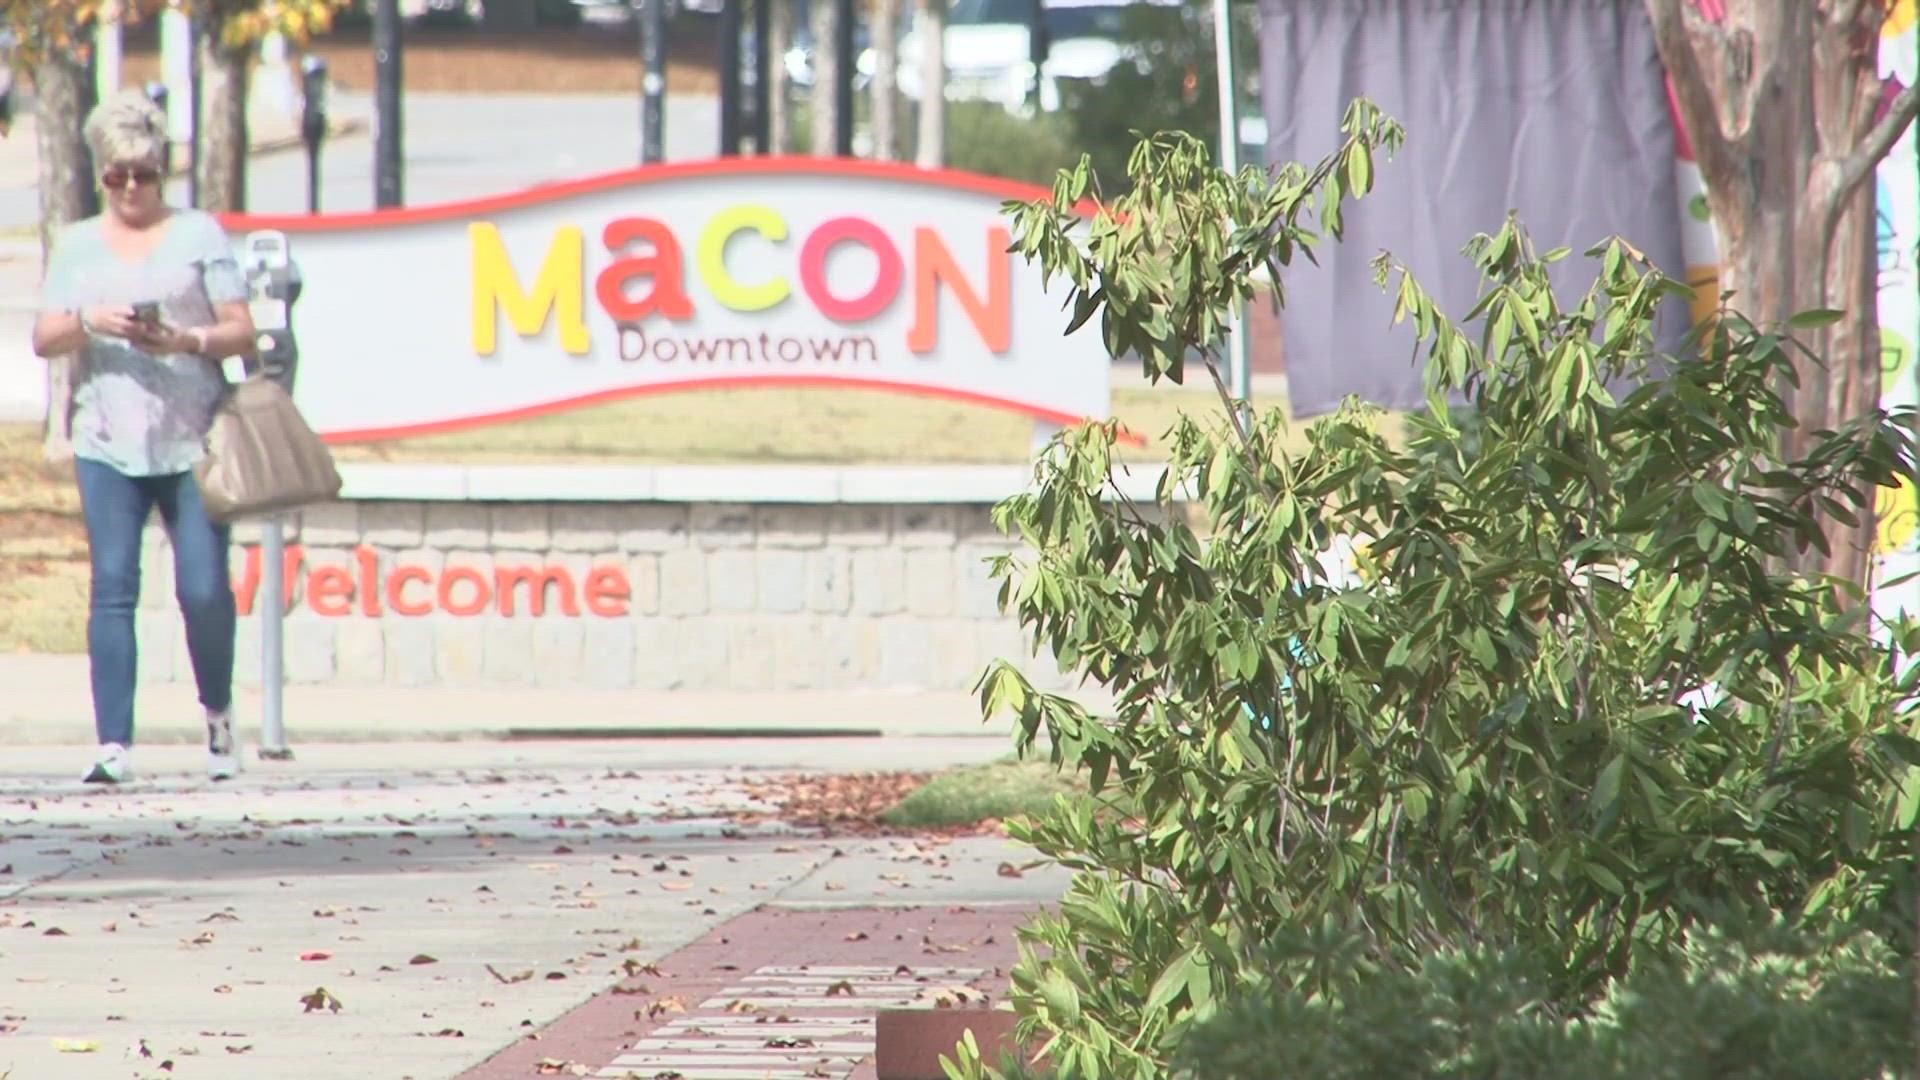 For some in downtown Macon, the pressure to meet the demand of rising prices has left their businesses suffering.